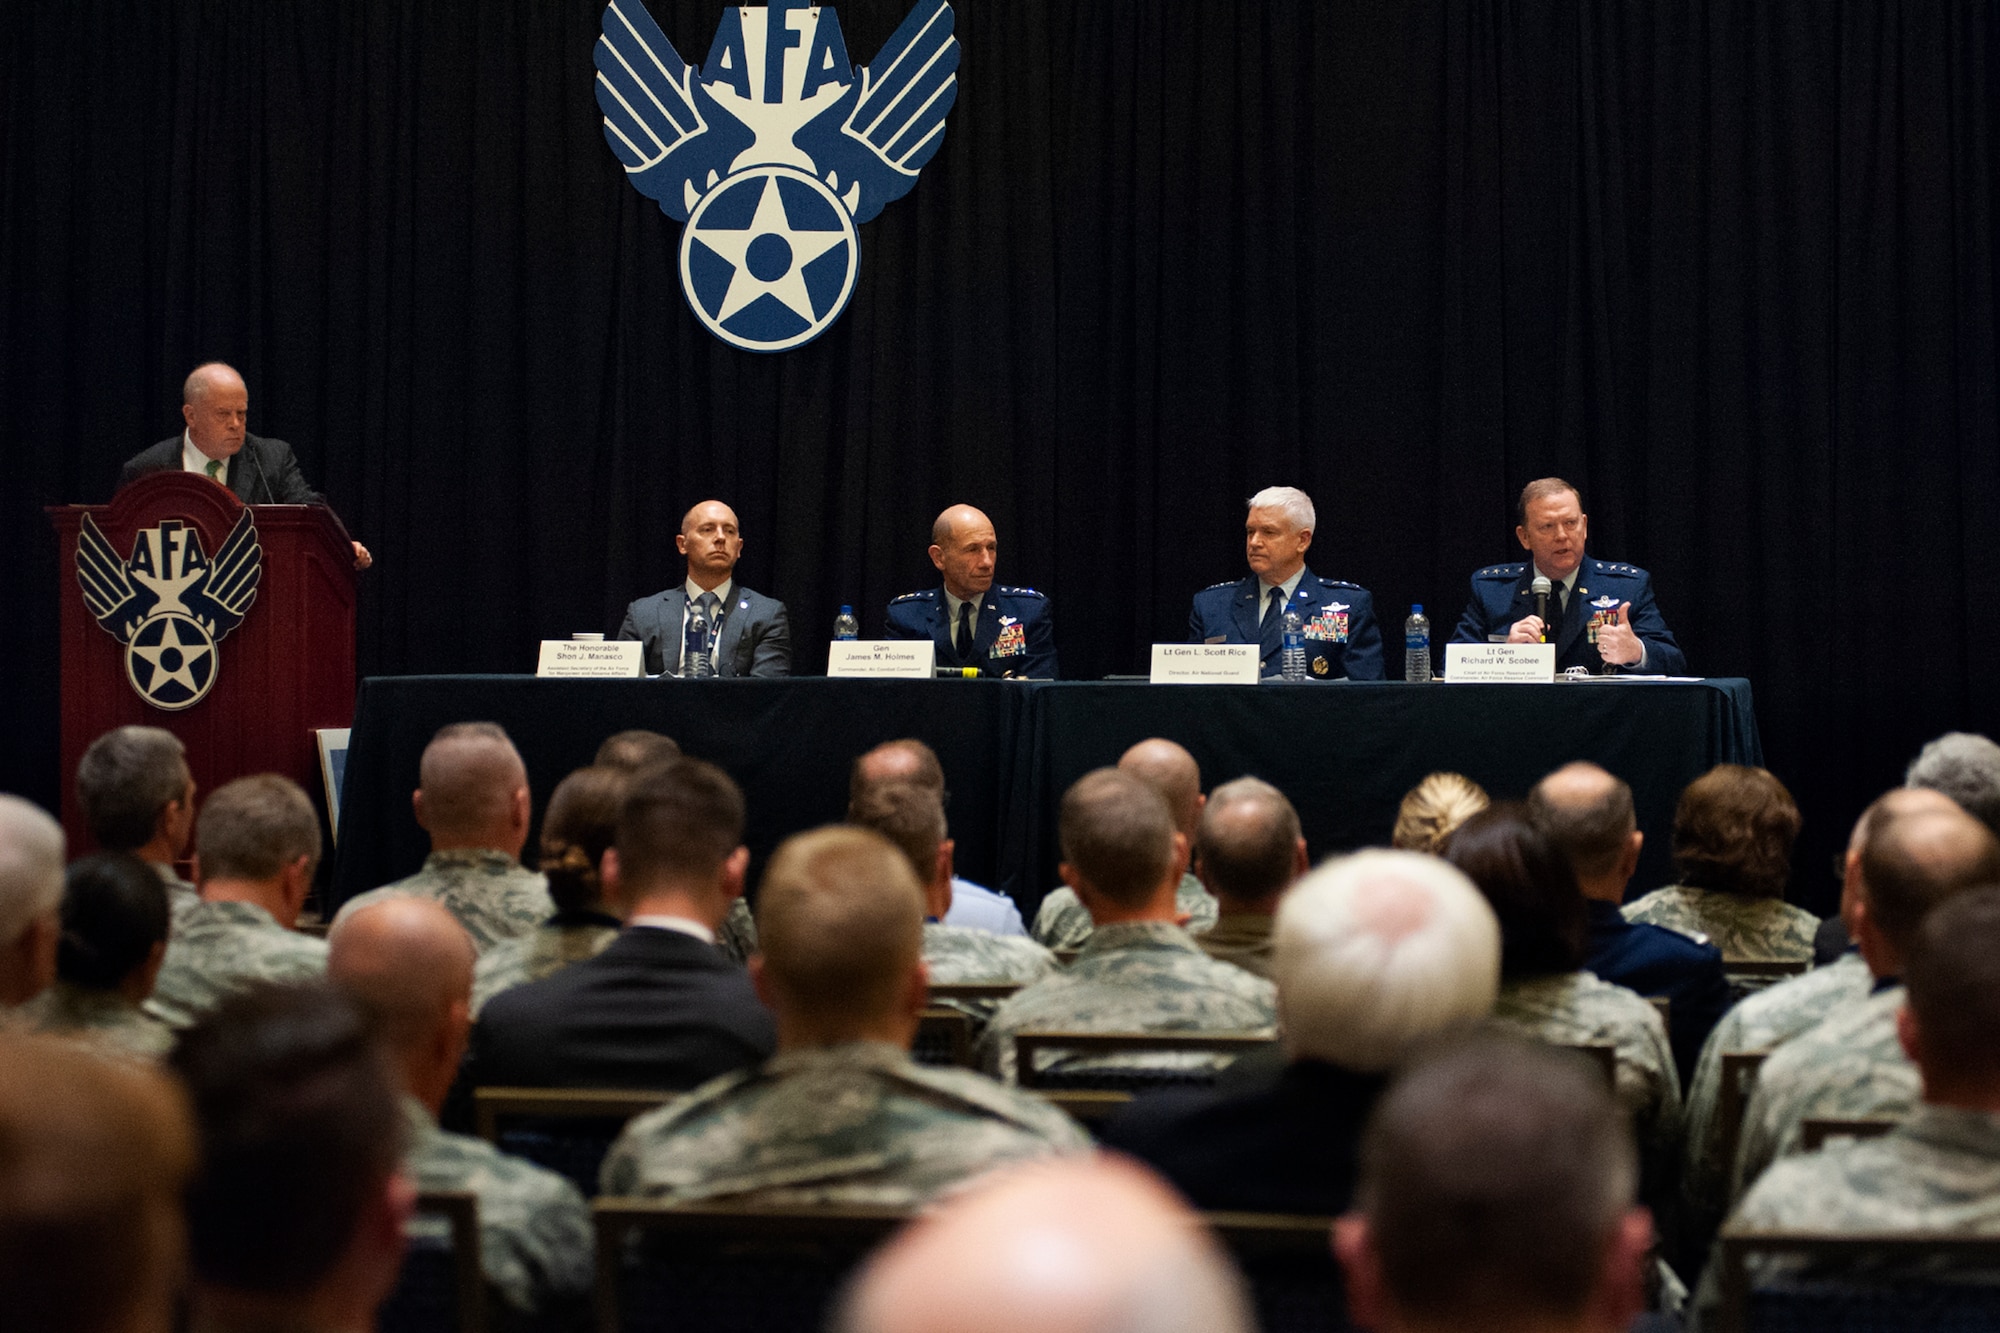 A panel consisting of (from left) Assistant Secretary of the Air Force for Manpower and Reserve Affairs, Shon J. Manasco, the Commander of Air Combat Command Gen. James M. Holmes, Director of the Air National Guard Lt. Gen. L. Scott Rice, and Chief of the Air Force Reserve and Commander Air Force Reserve Command Lt. Gen. Richard W. Scobee, participate in a total force integration panel during the Air Force Association Air, Space and Cyber Conference Sept. 18, 2018, in National Harbor, Md. The panel discussed ways to improve processes and better integrate Guard and Reserve Airmen into operations. (U.S. Air Force photo by Andy Moratay)